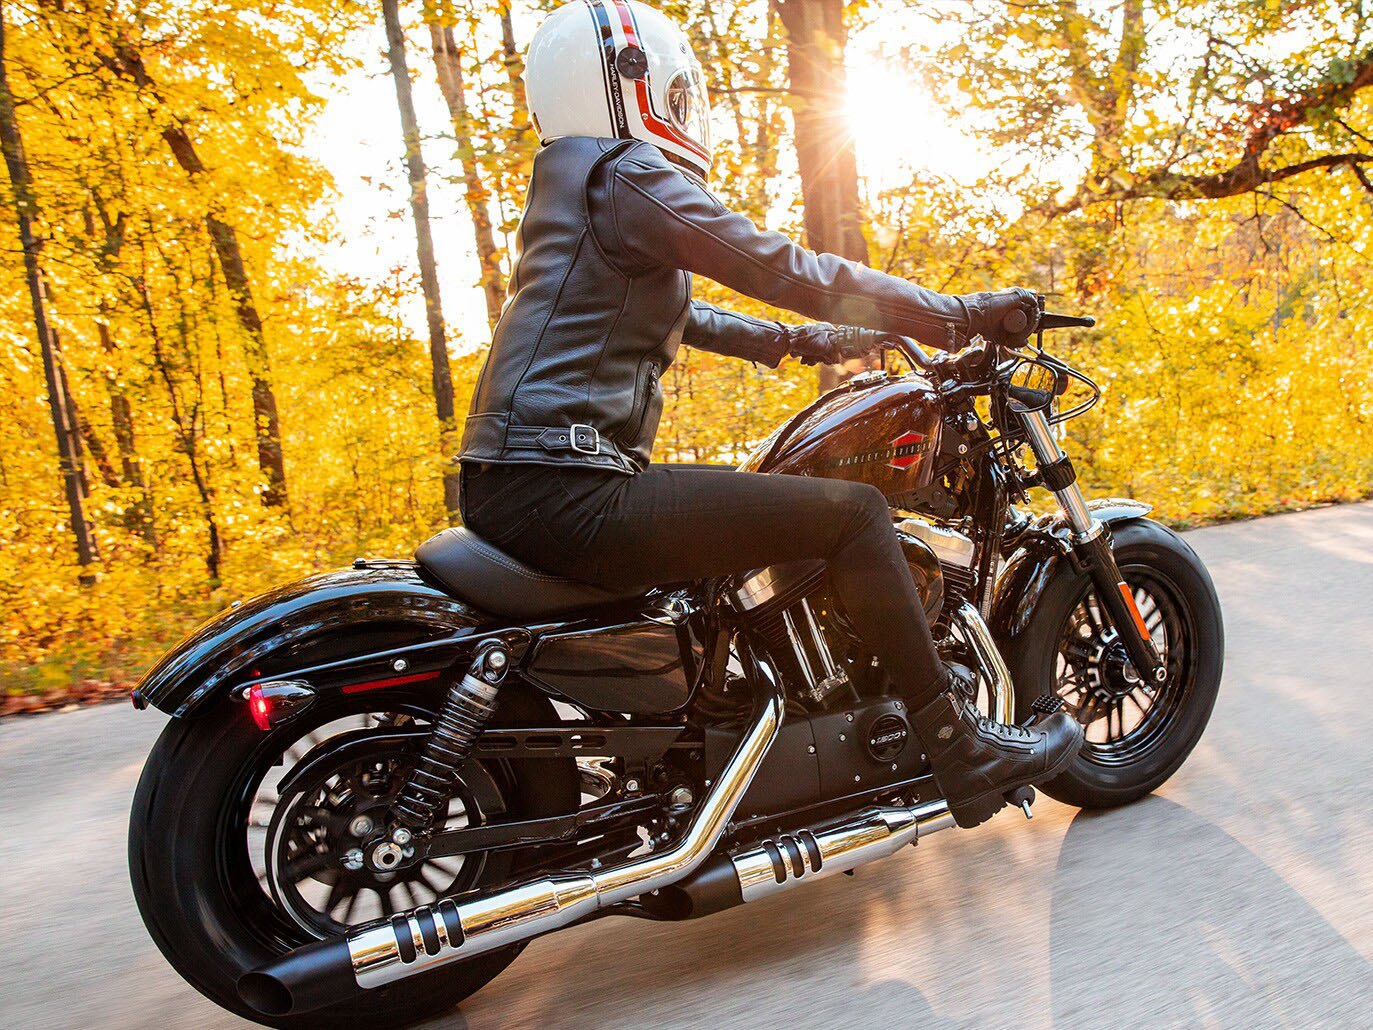 2022 Harley-Davidson Forty-Eight® in New London, Connecticut - Photo 4